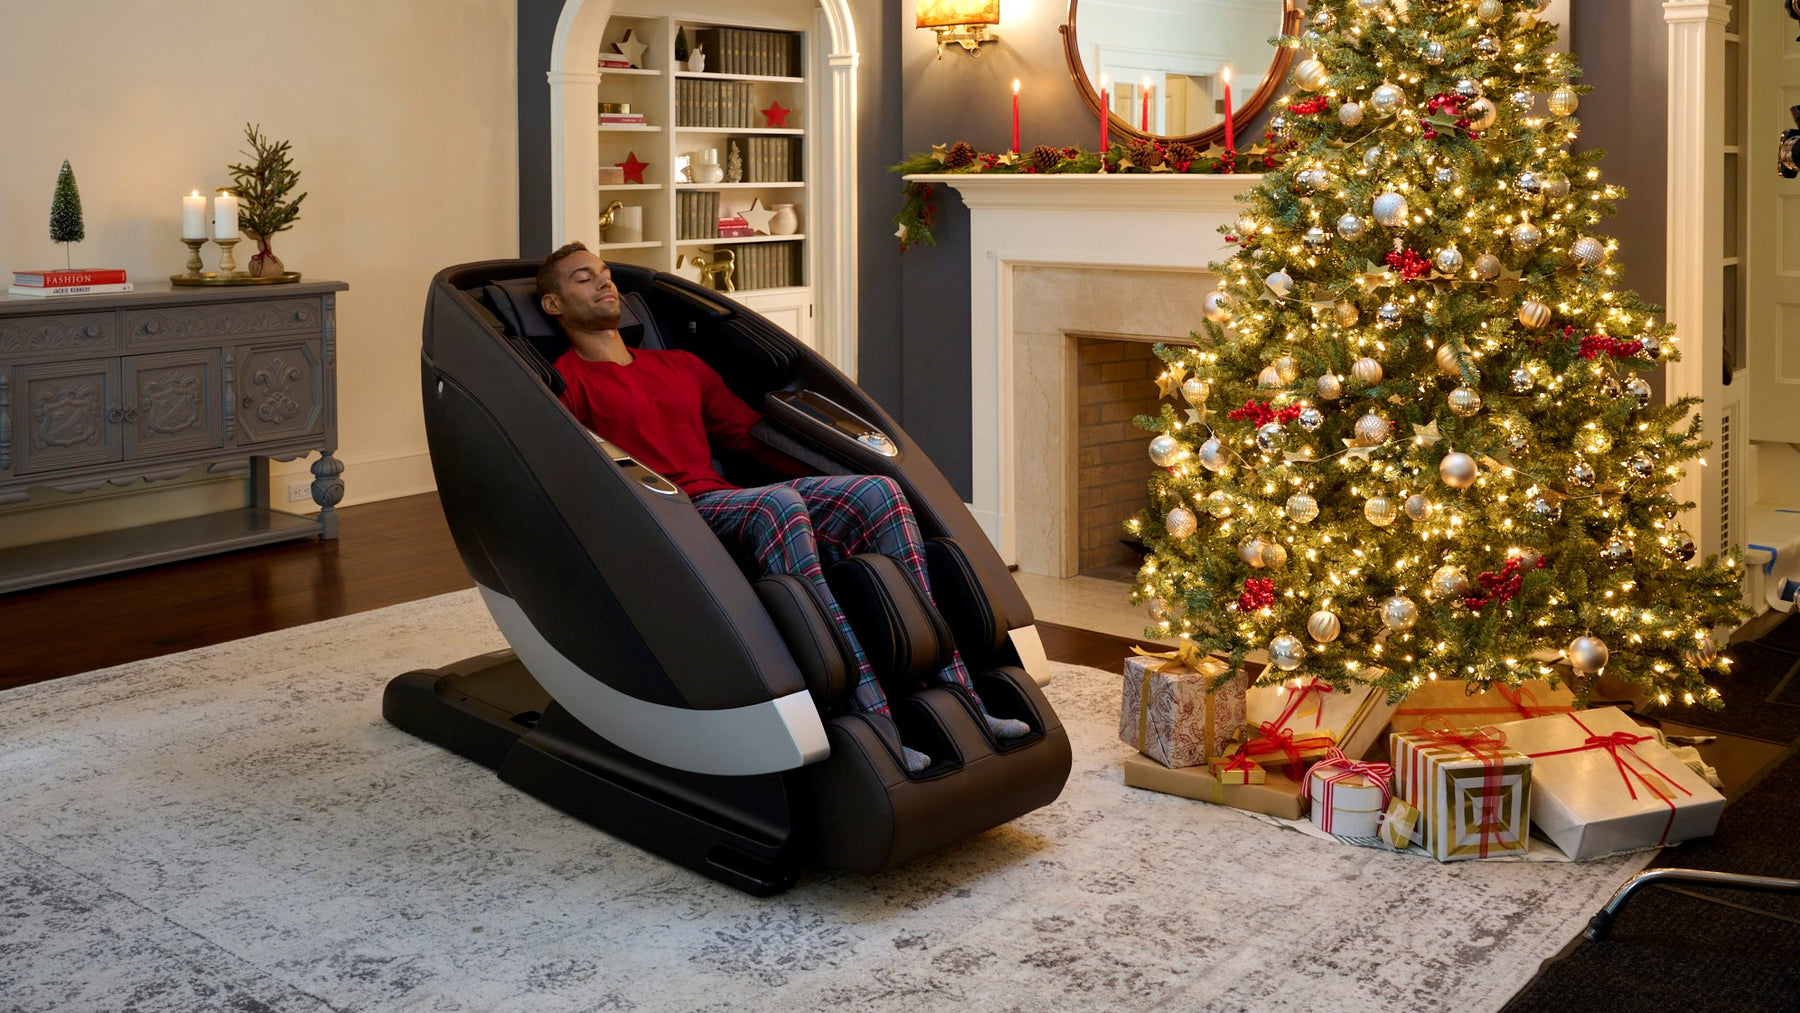 Man using the Human Touch Super Novo Massage Chair in a home with a Christmas Tree in the background